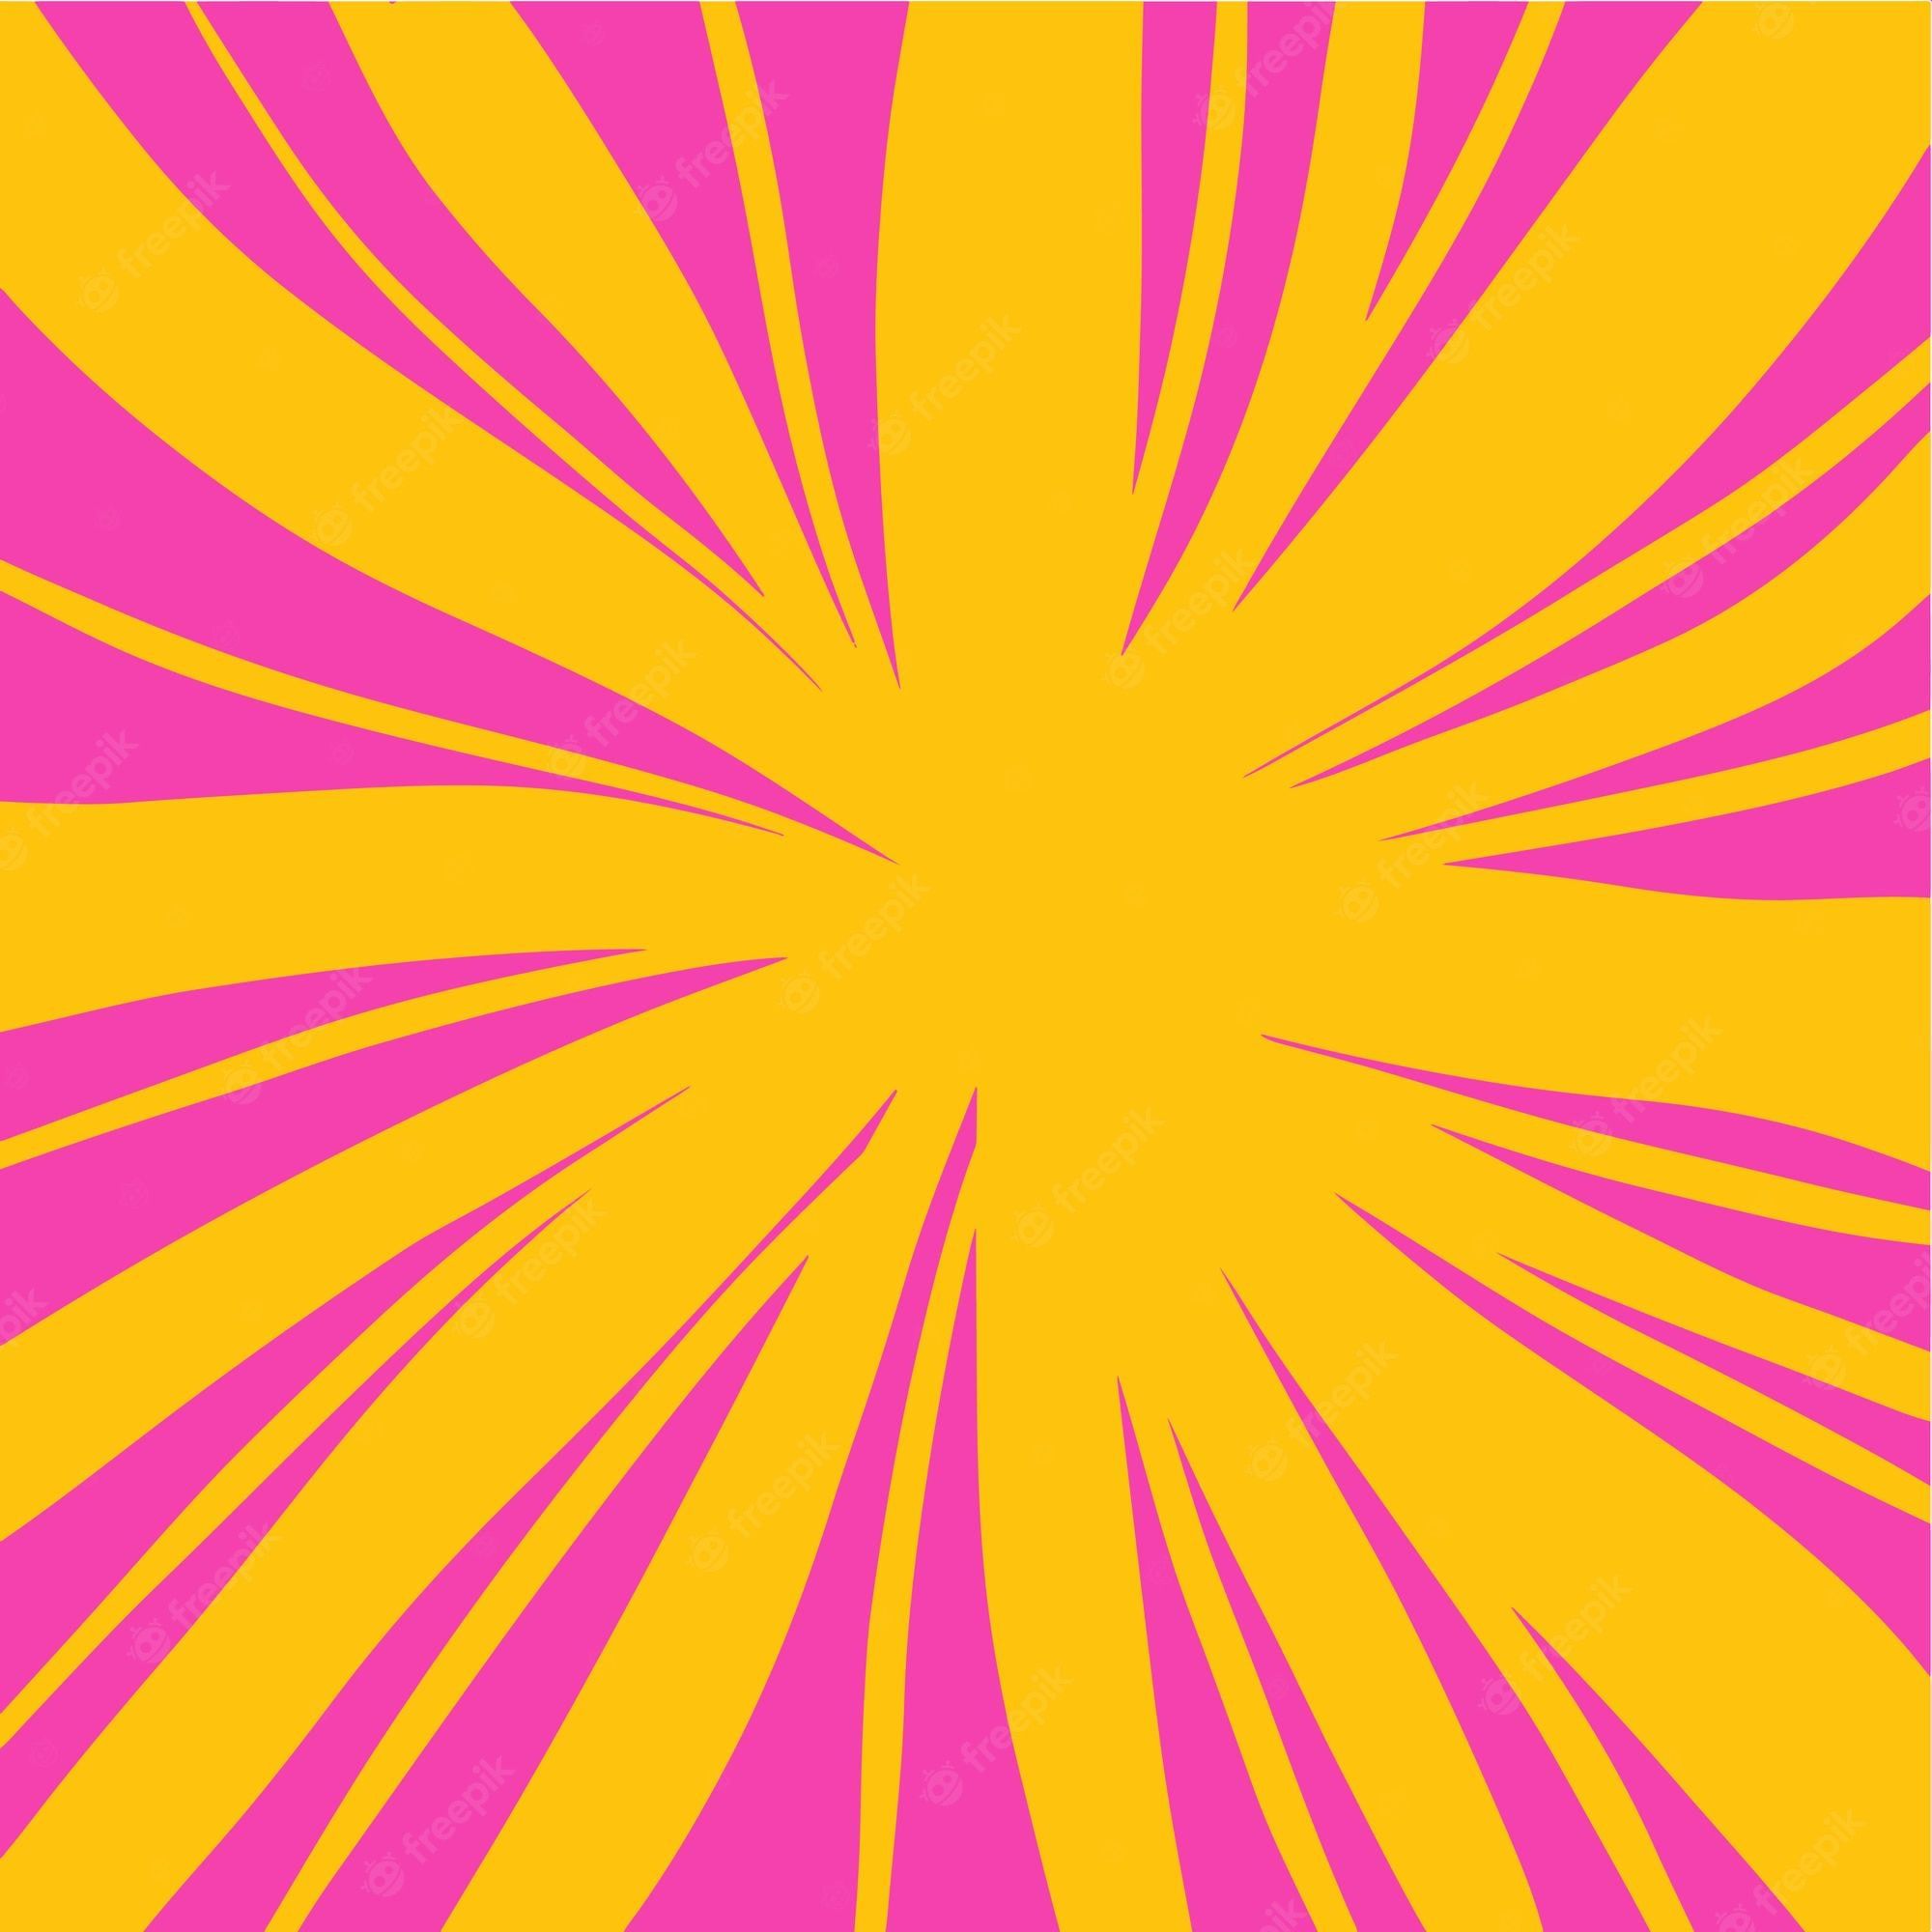 Premium Vector. Cute asymmetrical abstract retro vintage 90s 00s y2k aesthetic background design bright neon pink and yellow sunburst vector illustration